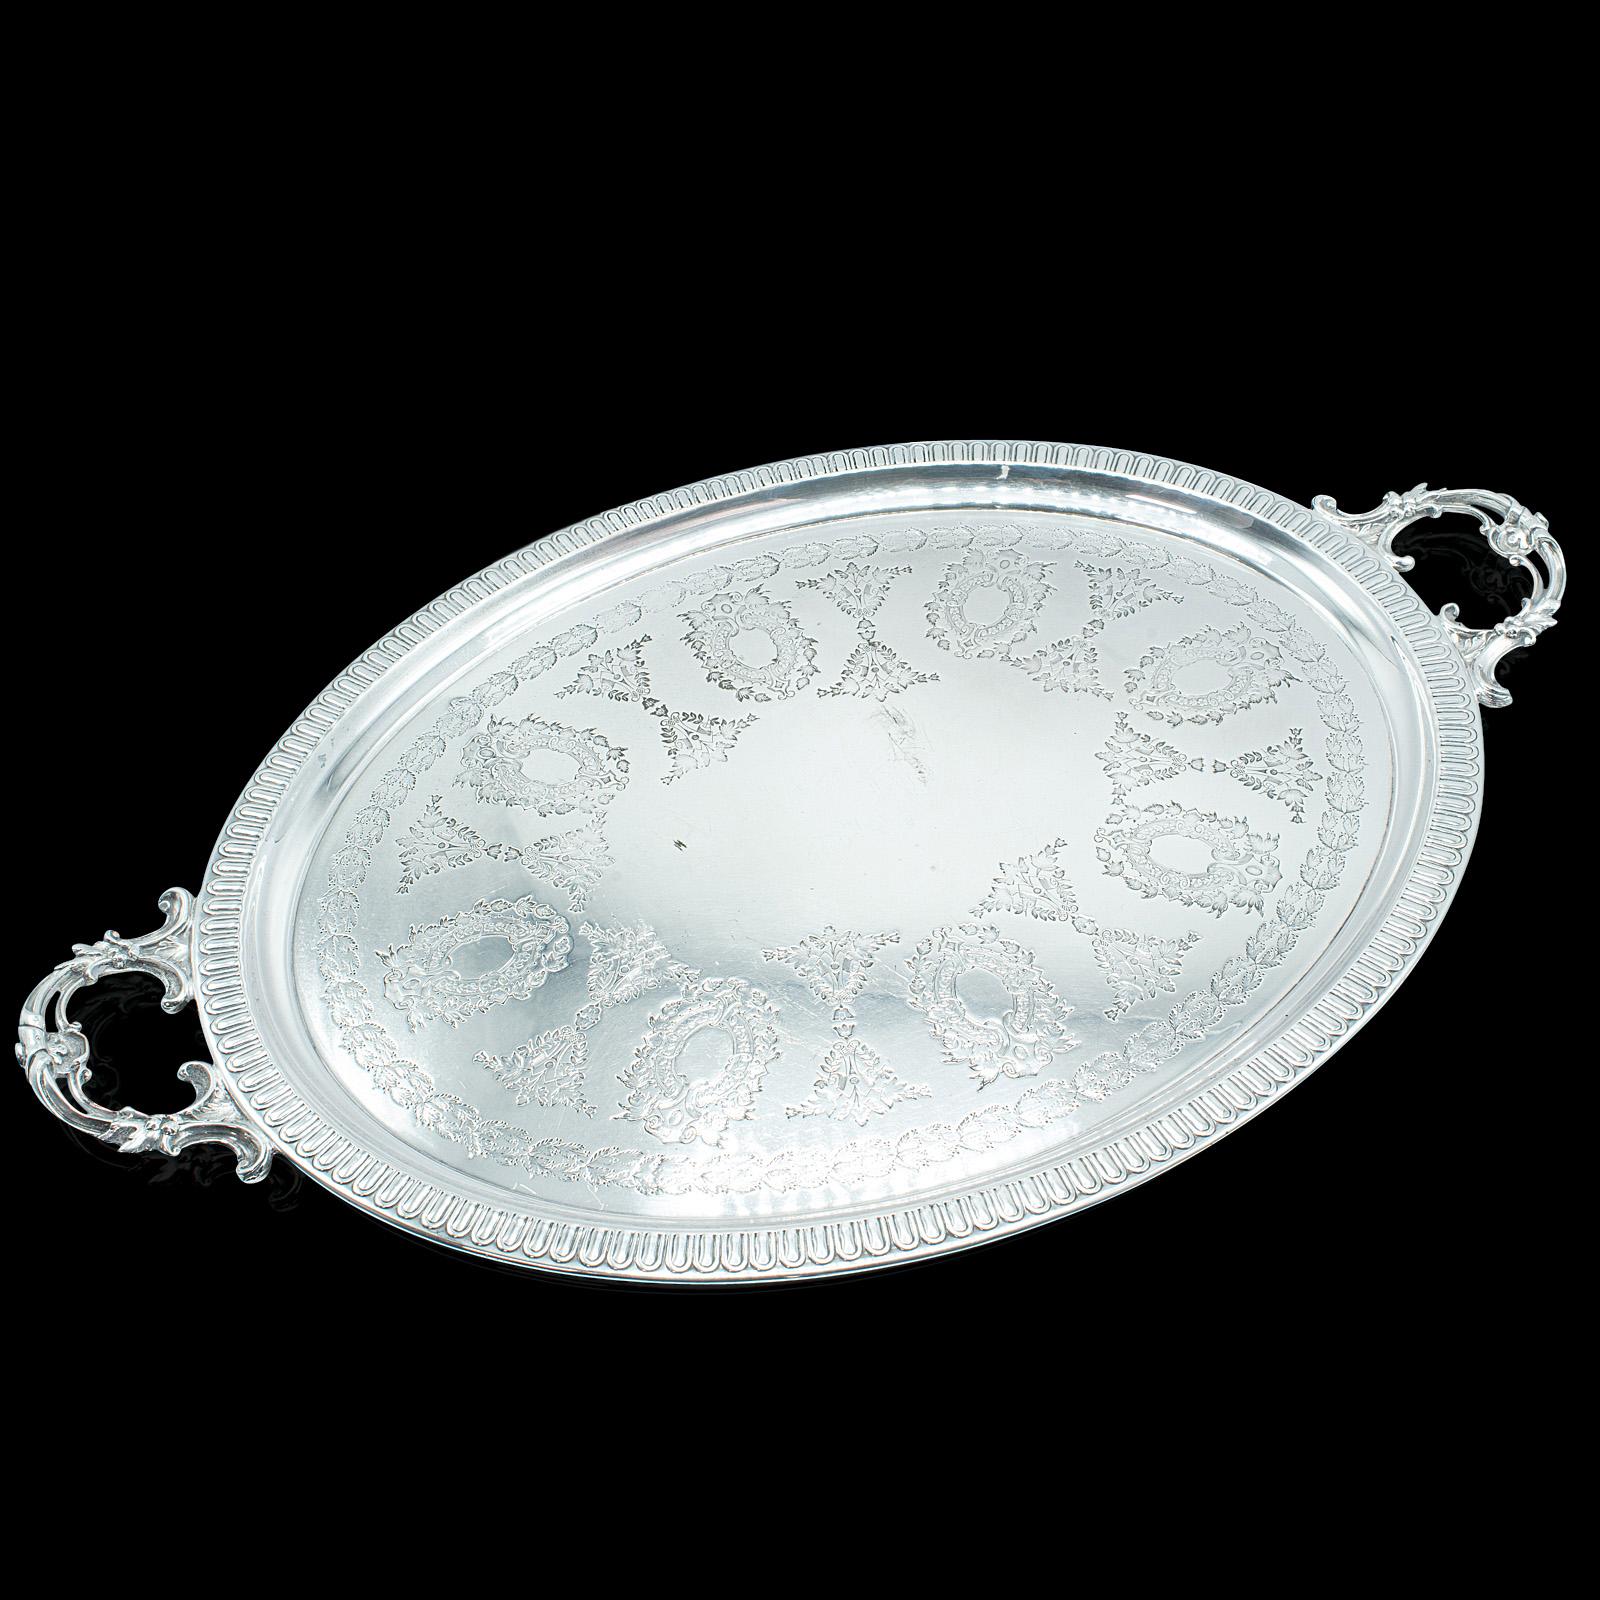 20th Century Antique Oval Decorative Serving Tray, English, Silver Plate, Afternoon Tea, 1910 For Sale